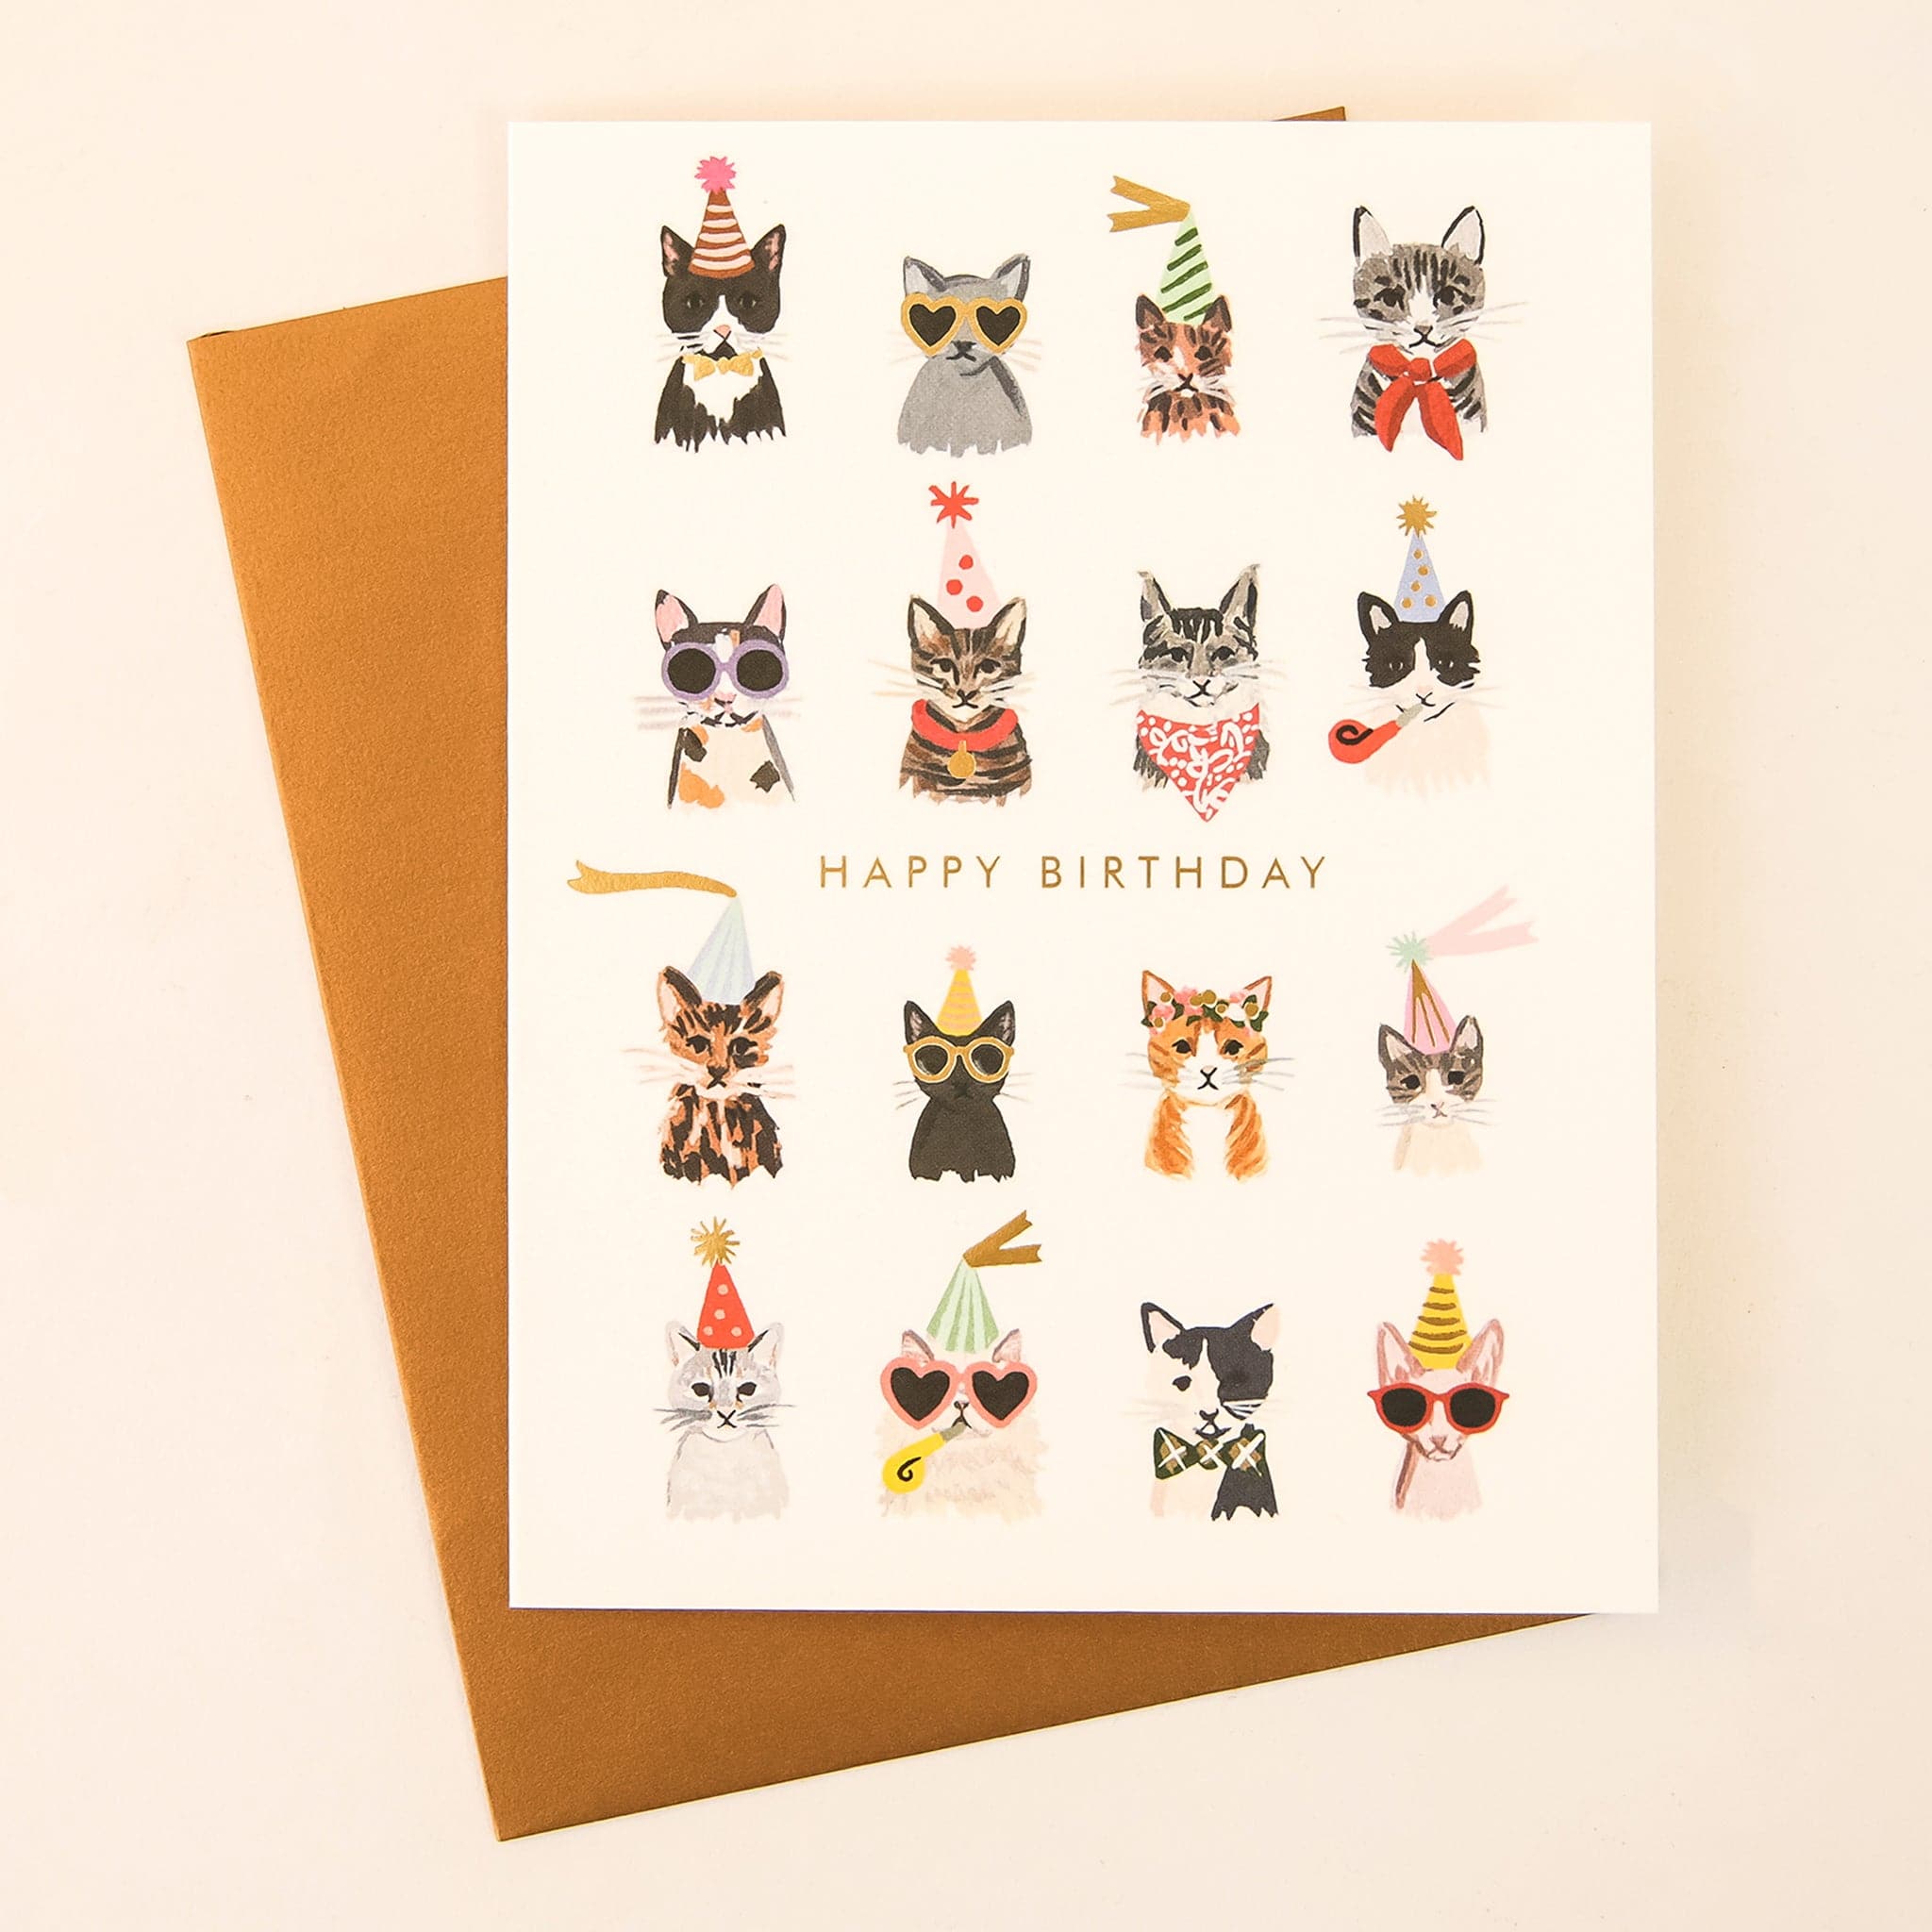 On a cream background is a photograph of a white card and a gold envelope. On the card is 16 various breeds of cats in all different colors wearing party hats, sunglasses and bowties along with gold text in the center that reads, &quot;Happy Birthday&quot;.